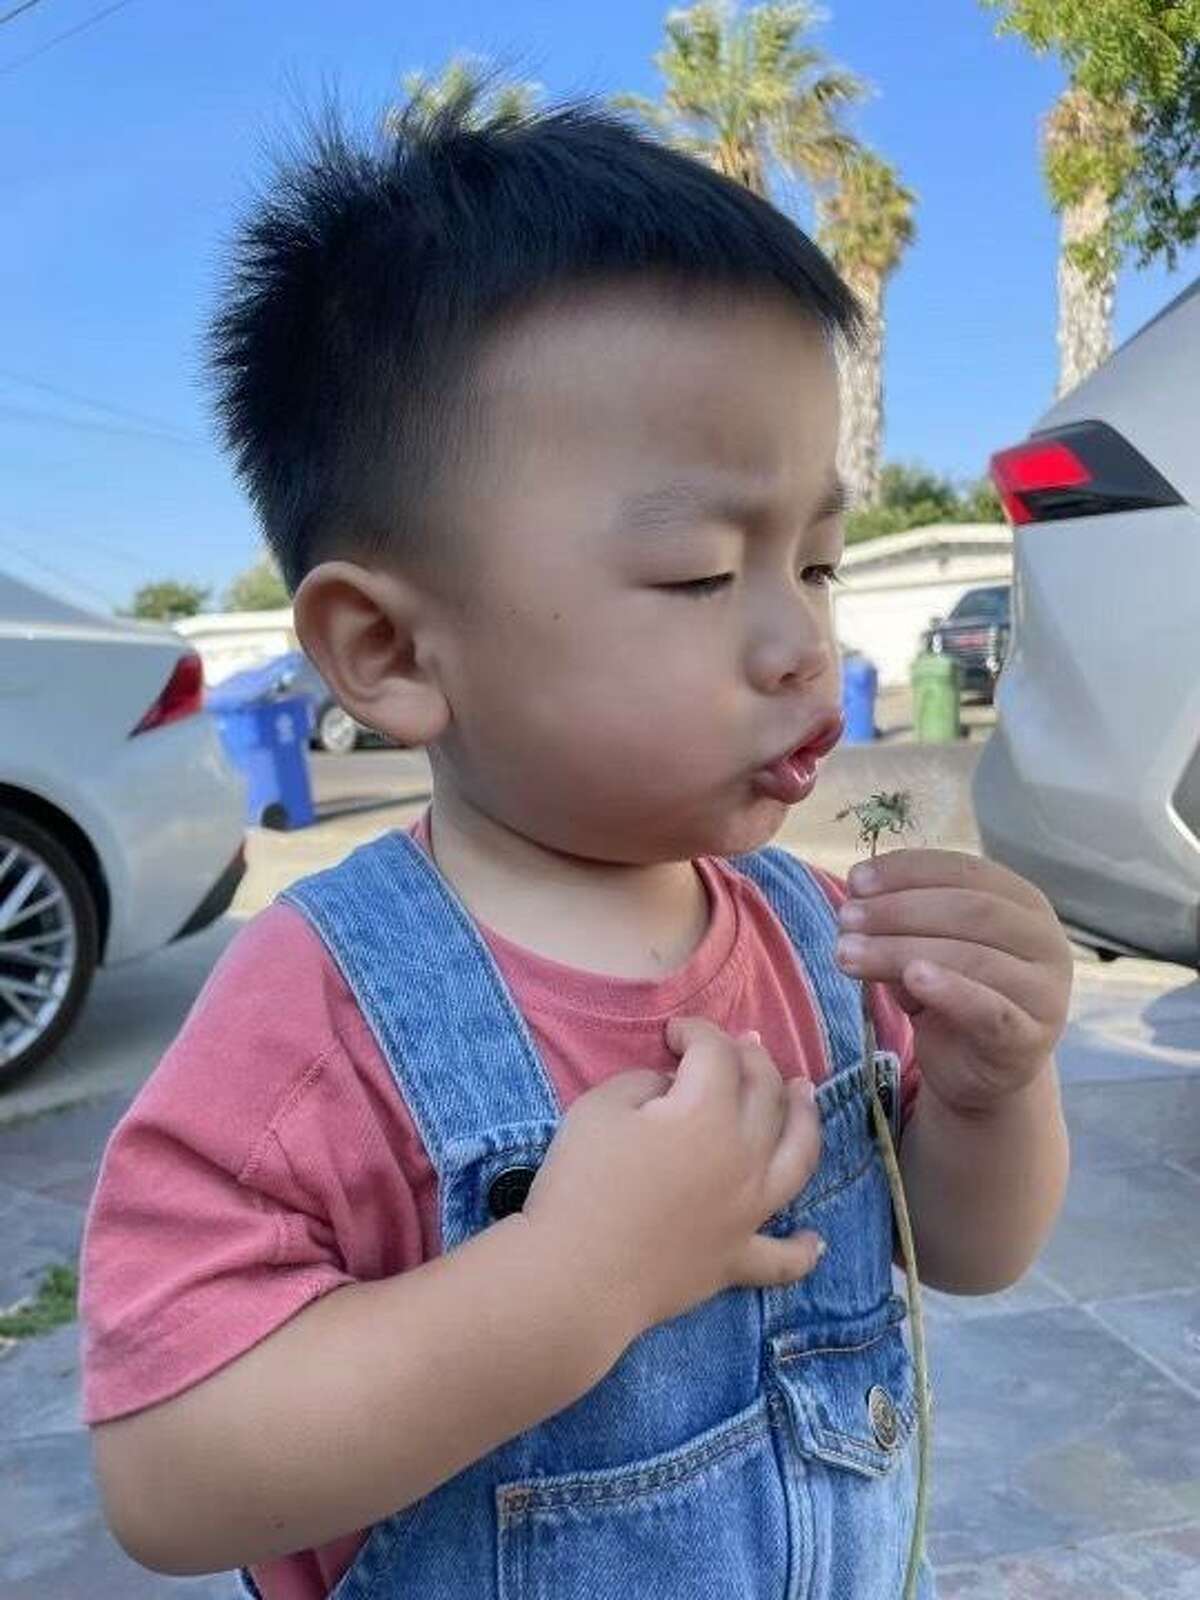 Jasper Wu, a 23-month-old toddler from Fremont, was killed by a stray bullet on Interstate 880 in Oakland. The Oakland Chinese Chamber of Commerce and other organizations are offering $10,000 for information leading to the arrest of the shooter responsible for Wu’s death.